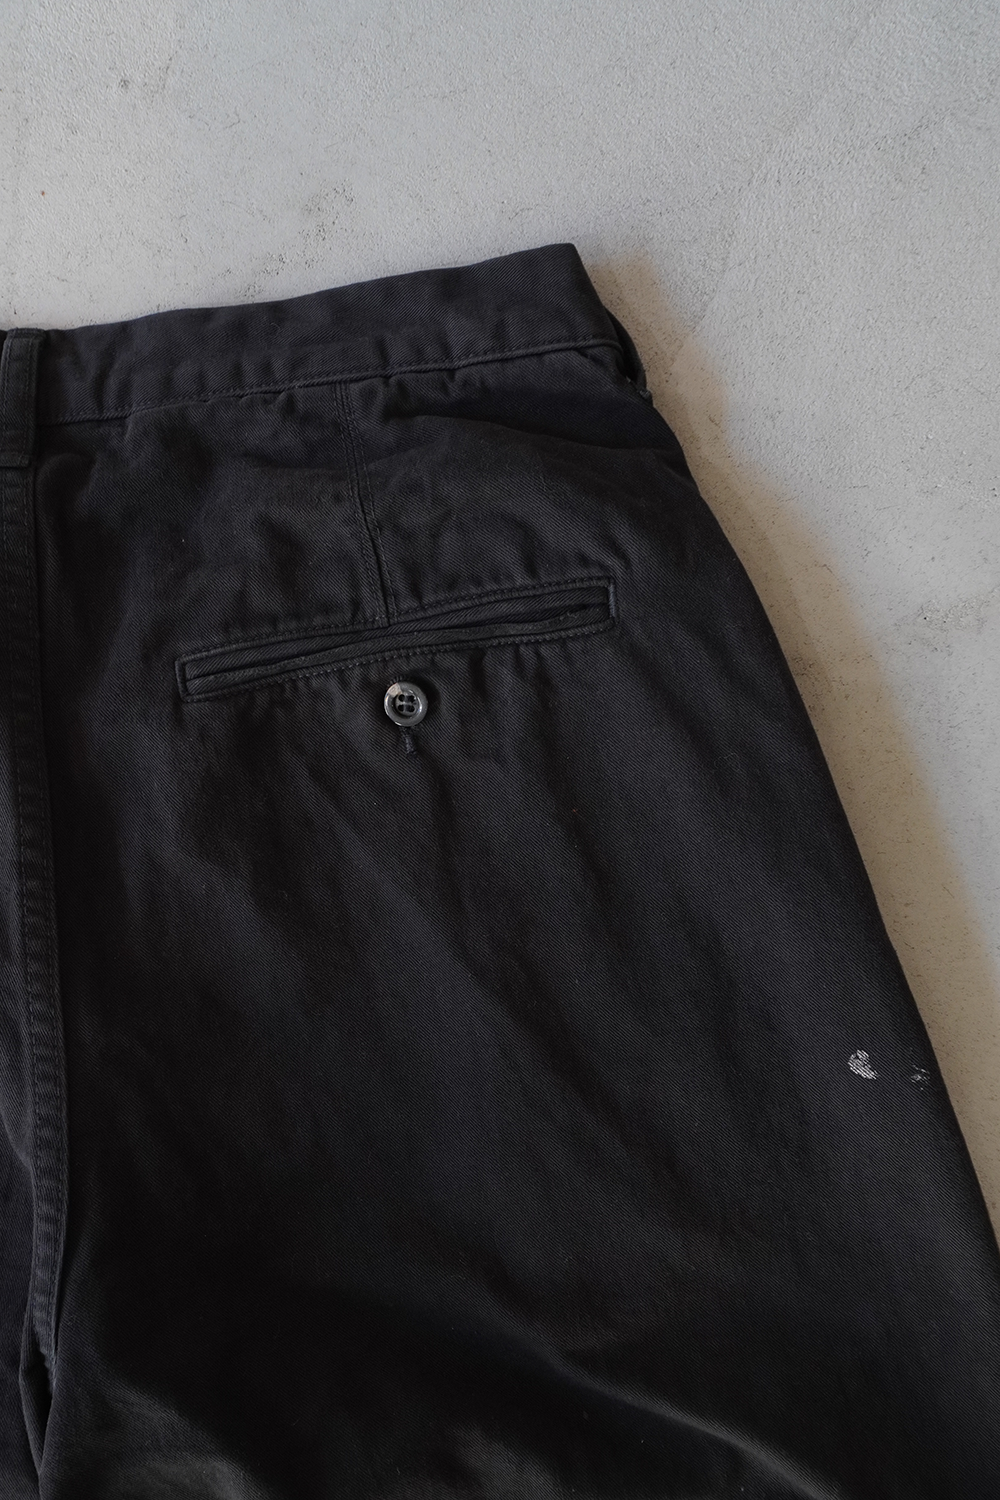 PAINT CHINO TROUSERS(BLACK)